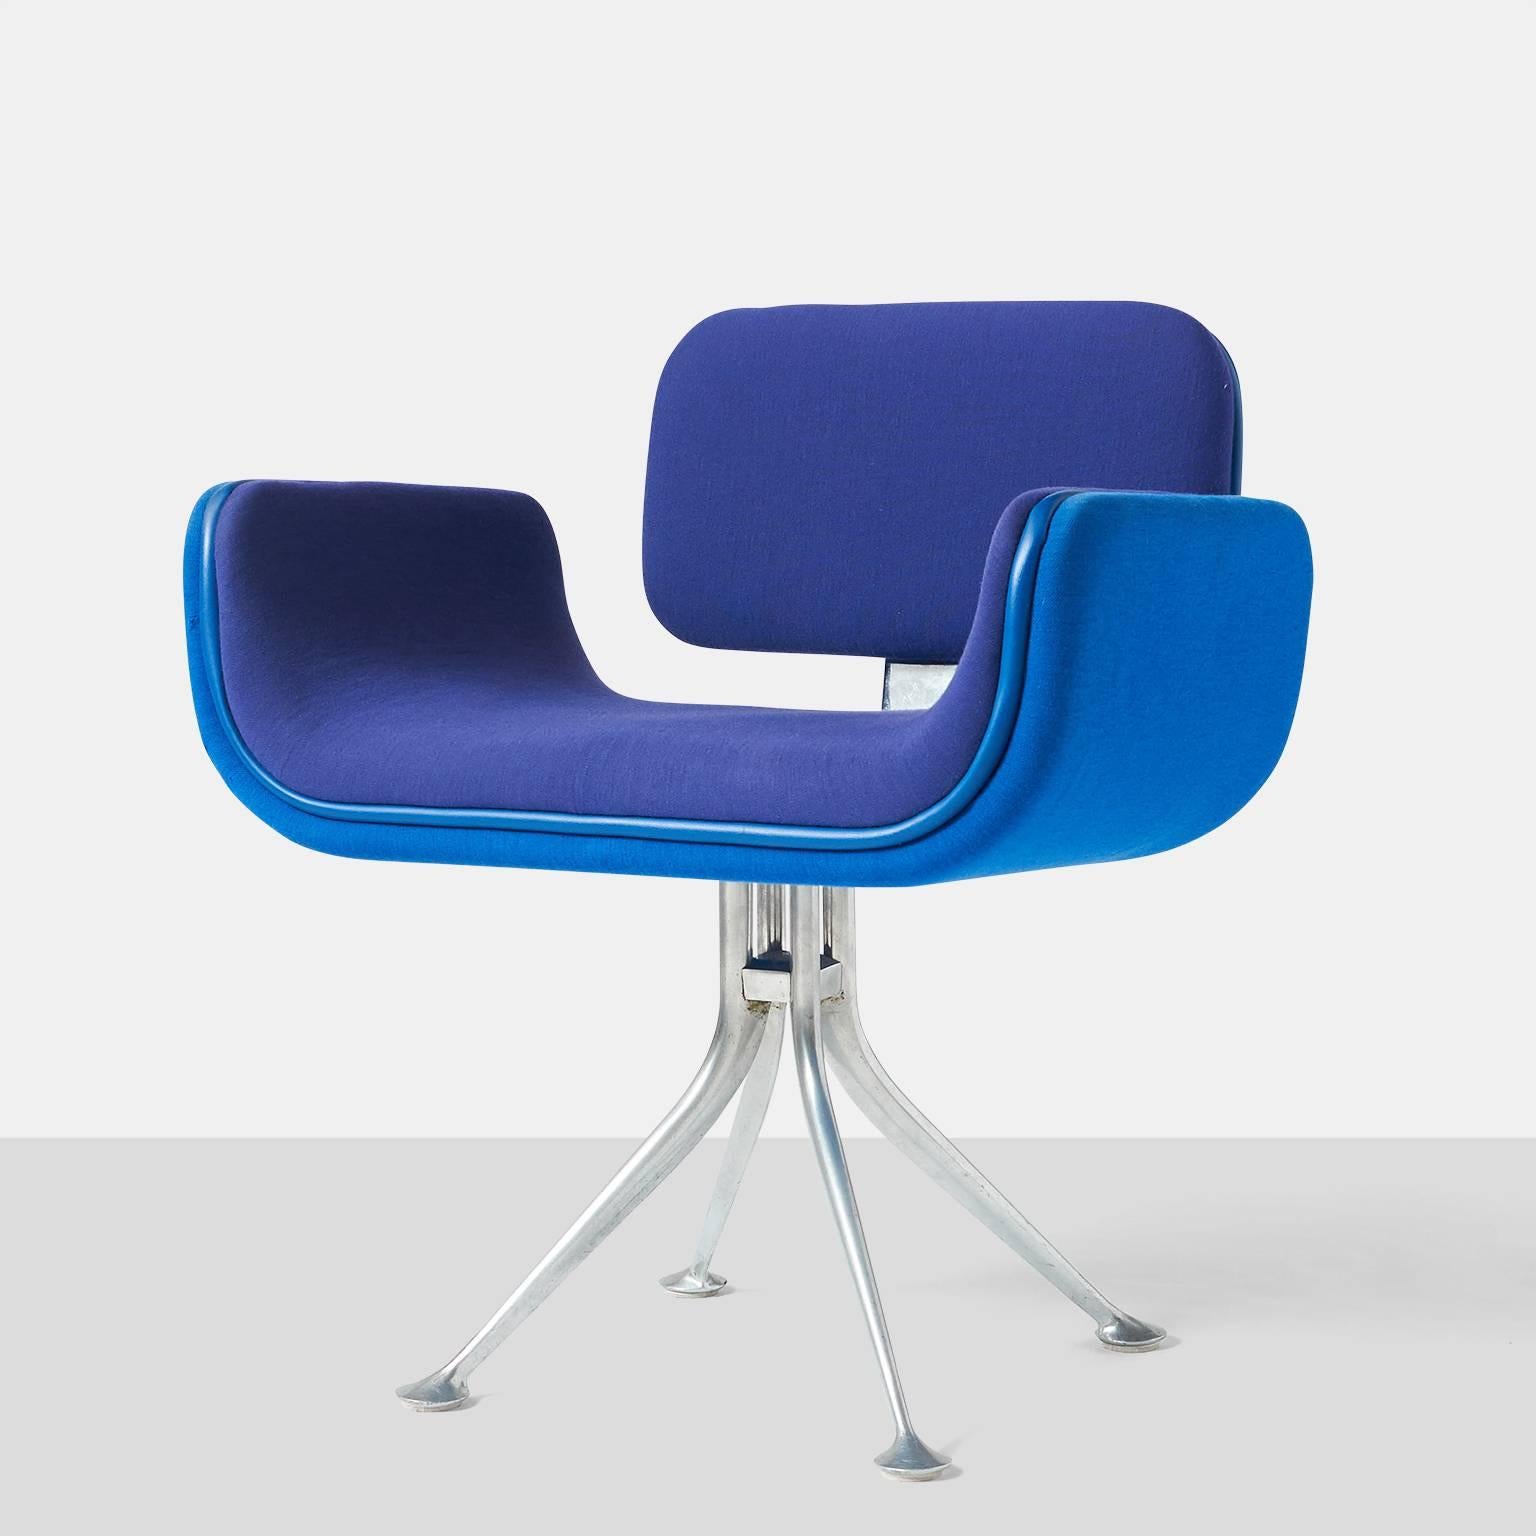 Alexander Girard armchair
An armchair by Alexander Girard for Herman Miller. A cast aluminum frame supports an upholstered seat that is shaped in steel and buffered with rubber edging. Upholstery in contrasting blues. Part of the collection that